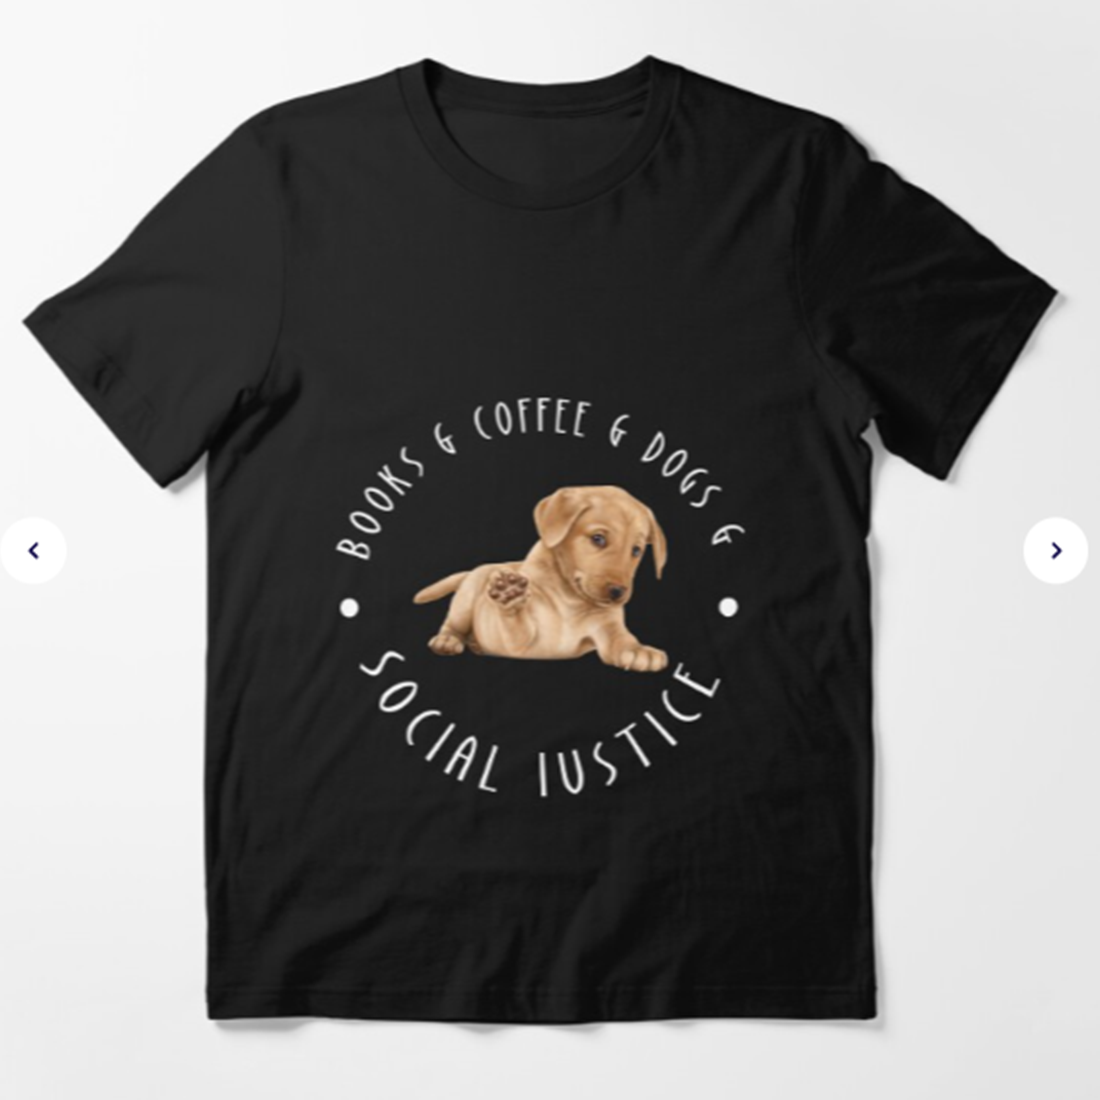 BOOKS & COFFEE & DOGS & SOCIAL JUSTICE Pullover Sweatshirt cover image.